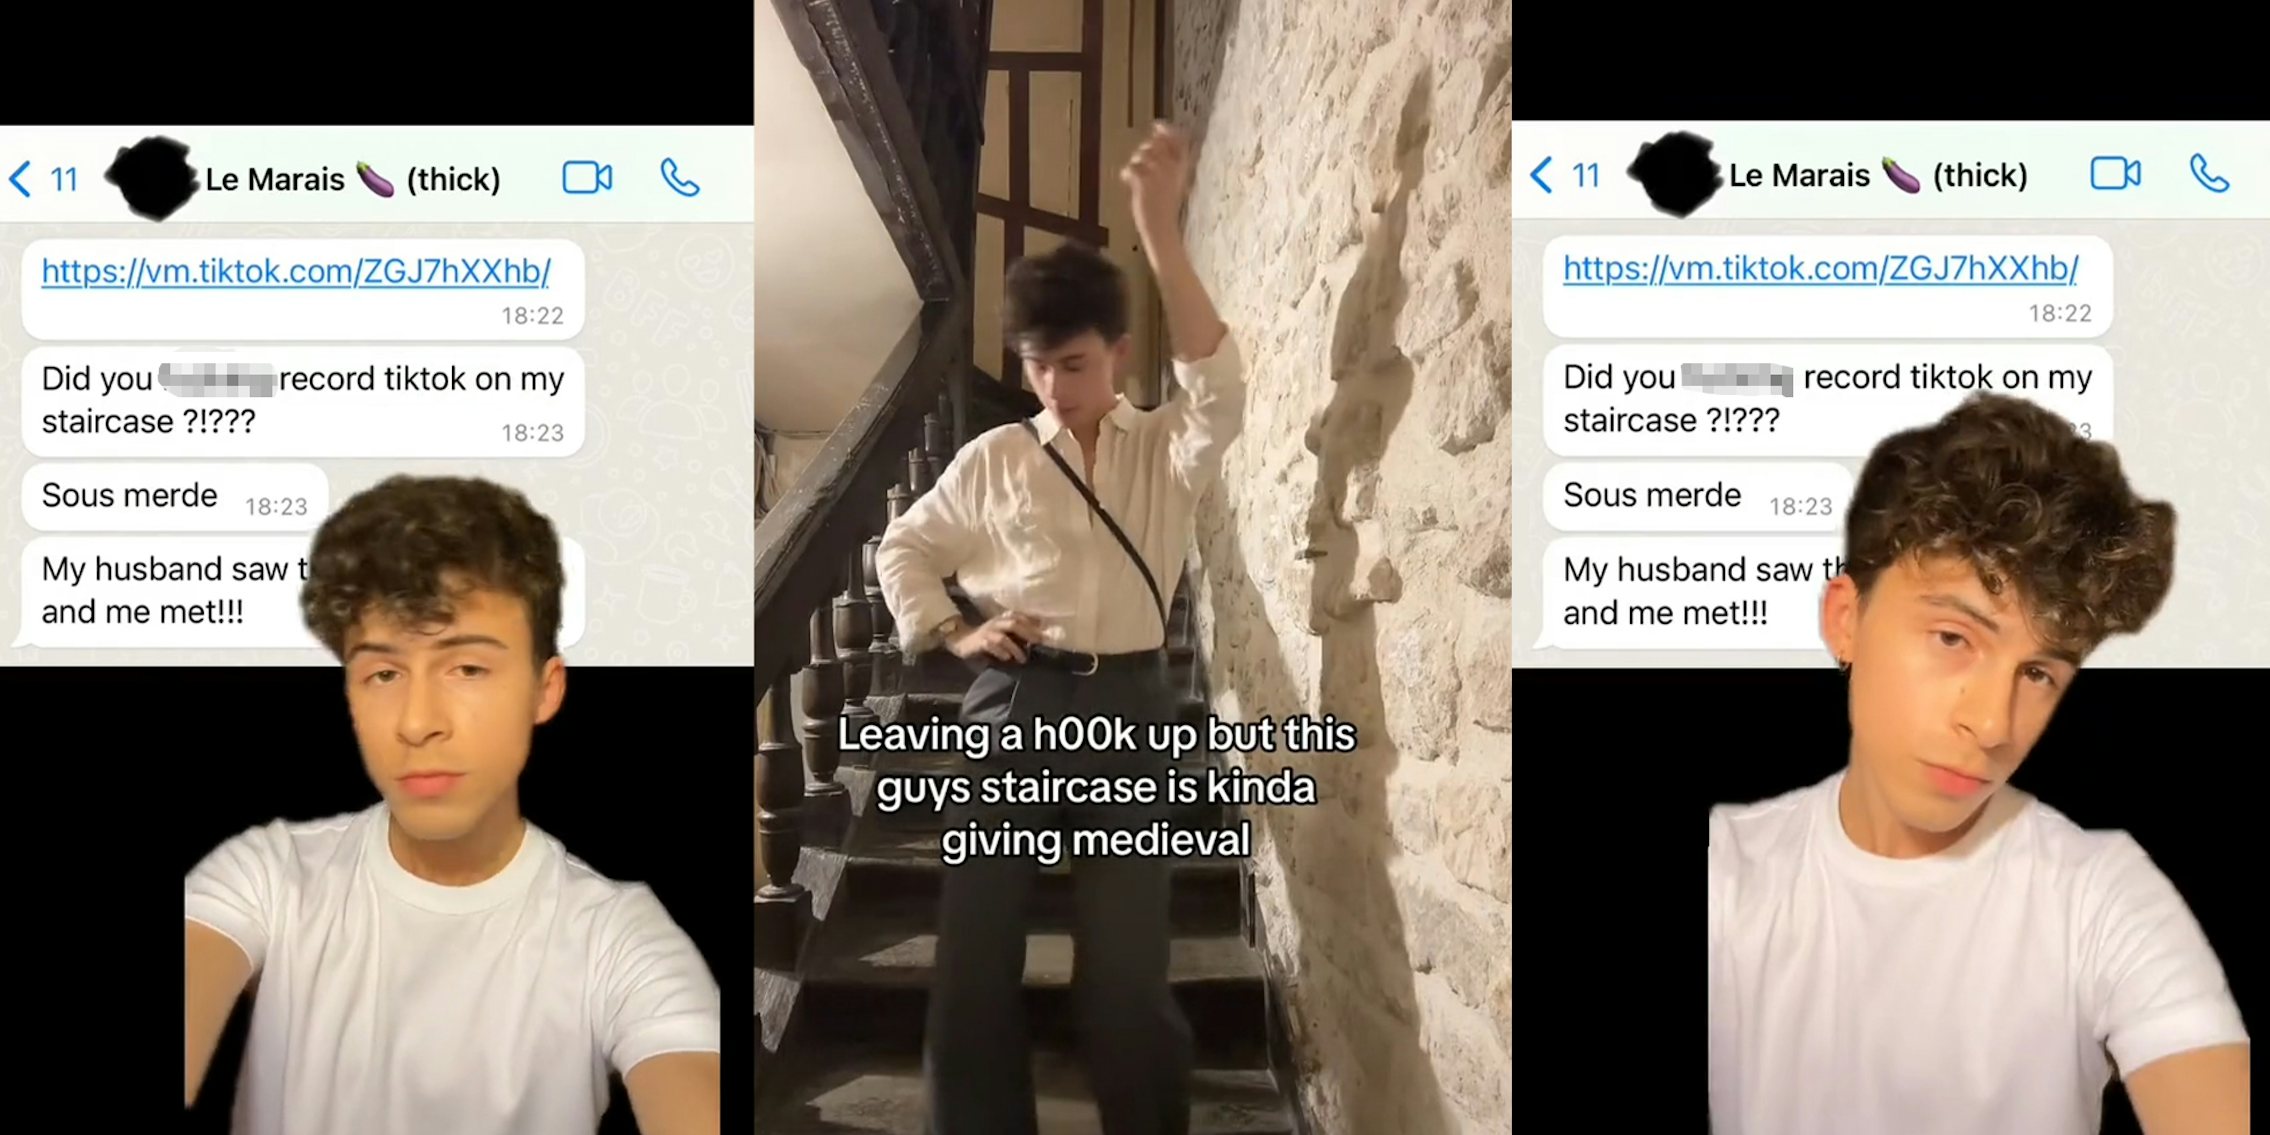 Married man gets caught cheating after his date posts TikTok in his apartment stairwell